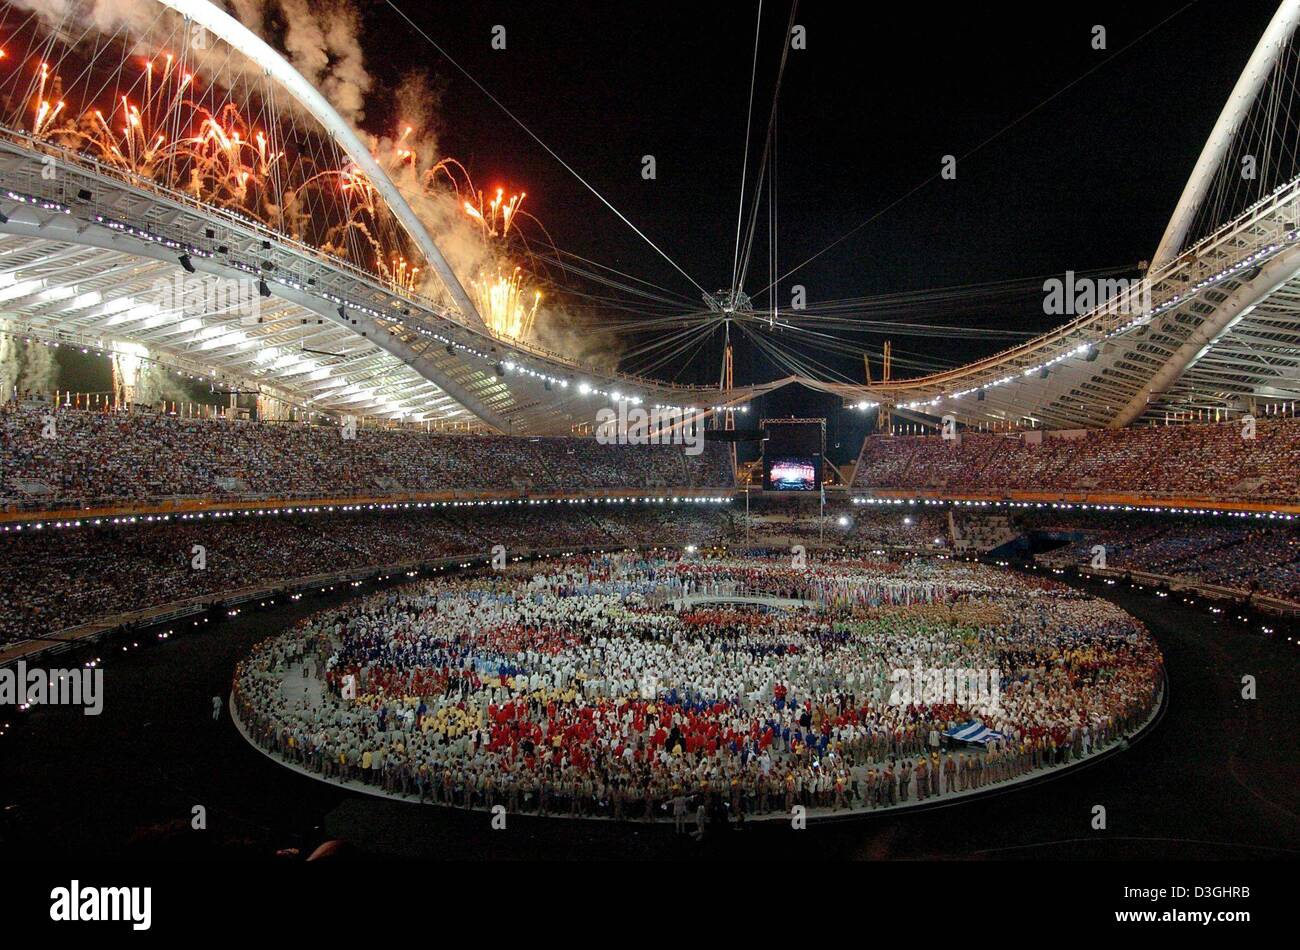 (dpa) - Olympic athletes gather in the Olympic Stadium during the fireworks at the opening ceremony of the 2004 Olympics in Athens, Friday 13 August 2004. Stock Photo